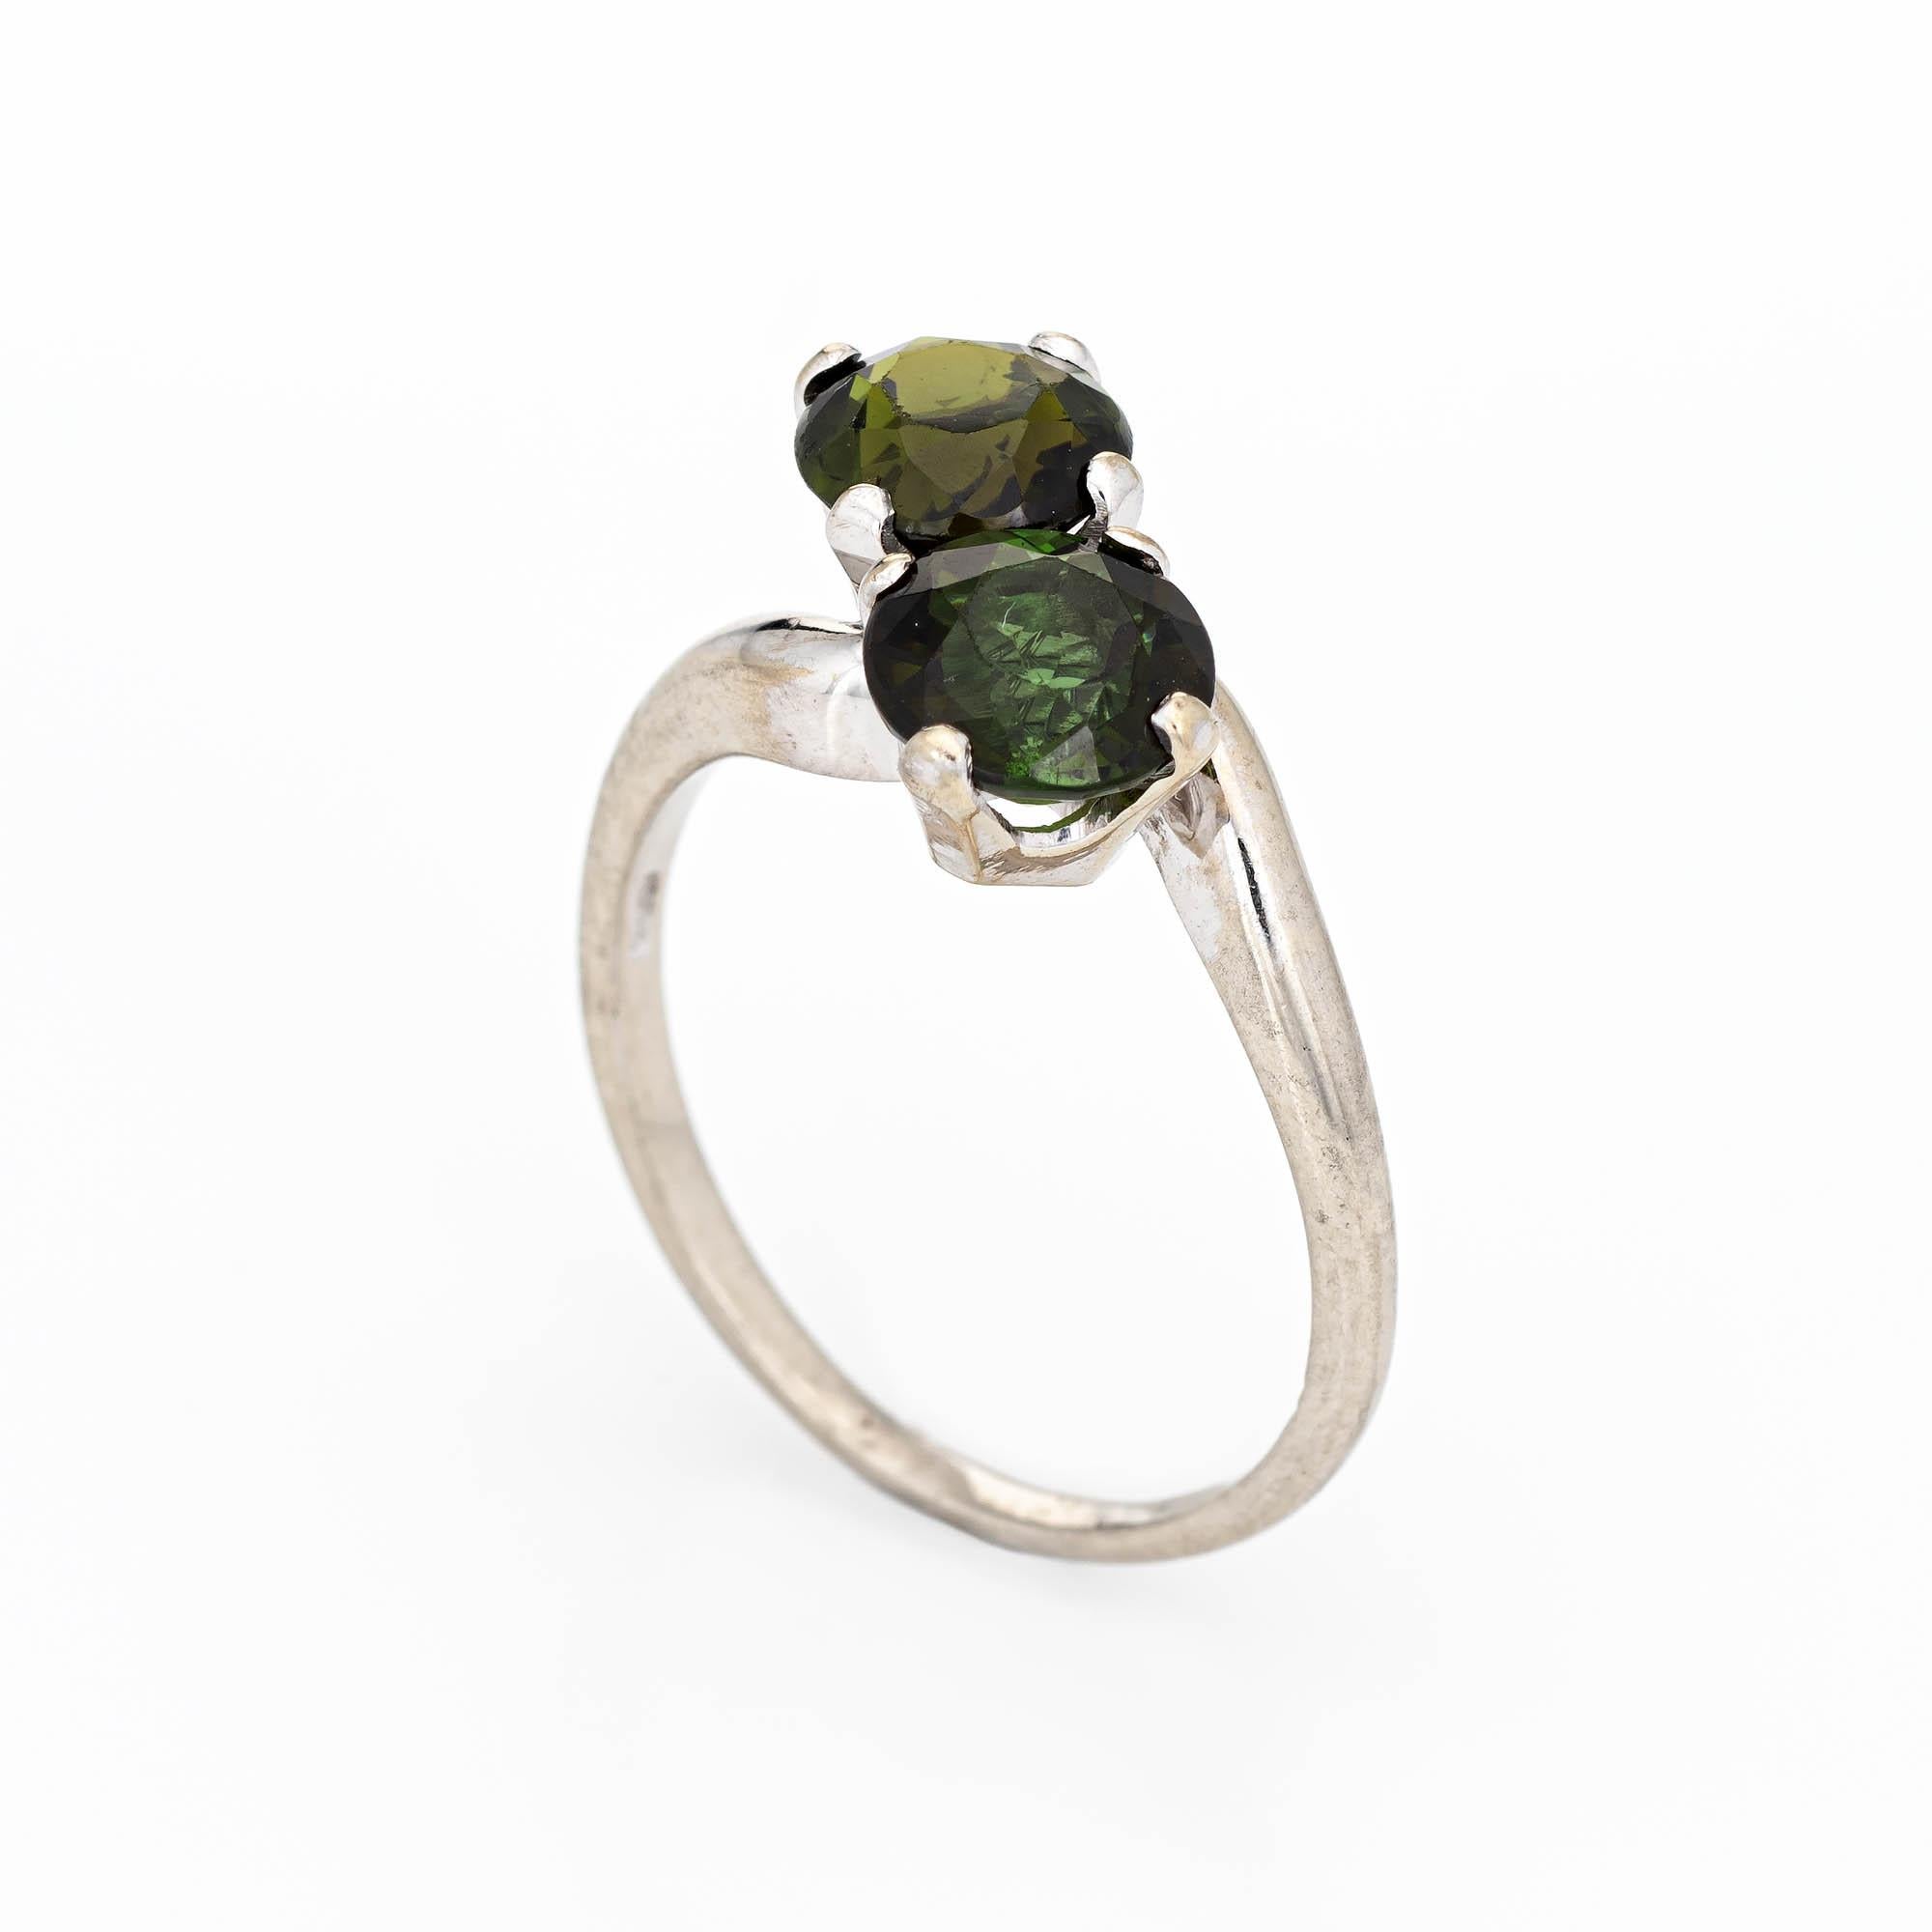 Finely detailed vintage green tourmaline 'moi et toi' ring crafted in 14k white gold. 

Two estimated 1.50 carat (each) faceted round cut green tourmalines total an estimated 3 carats. The tourmalines are in excellent condition and free of cracks or